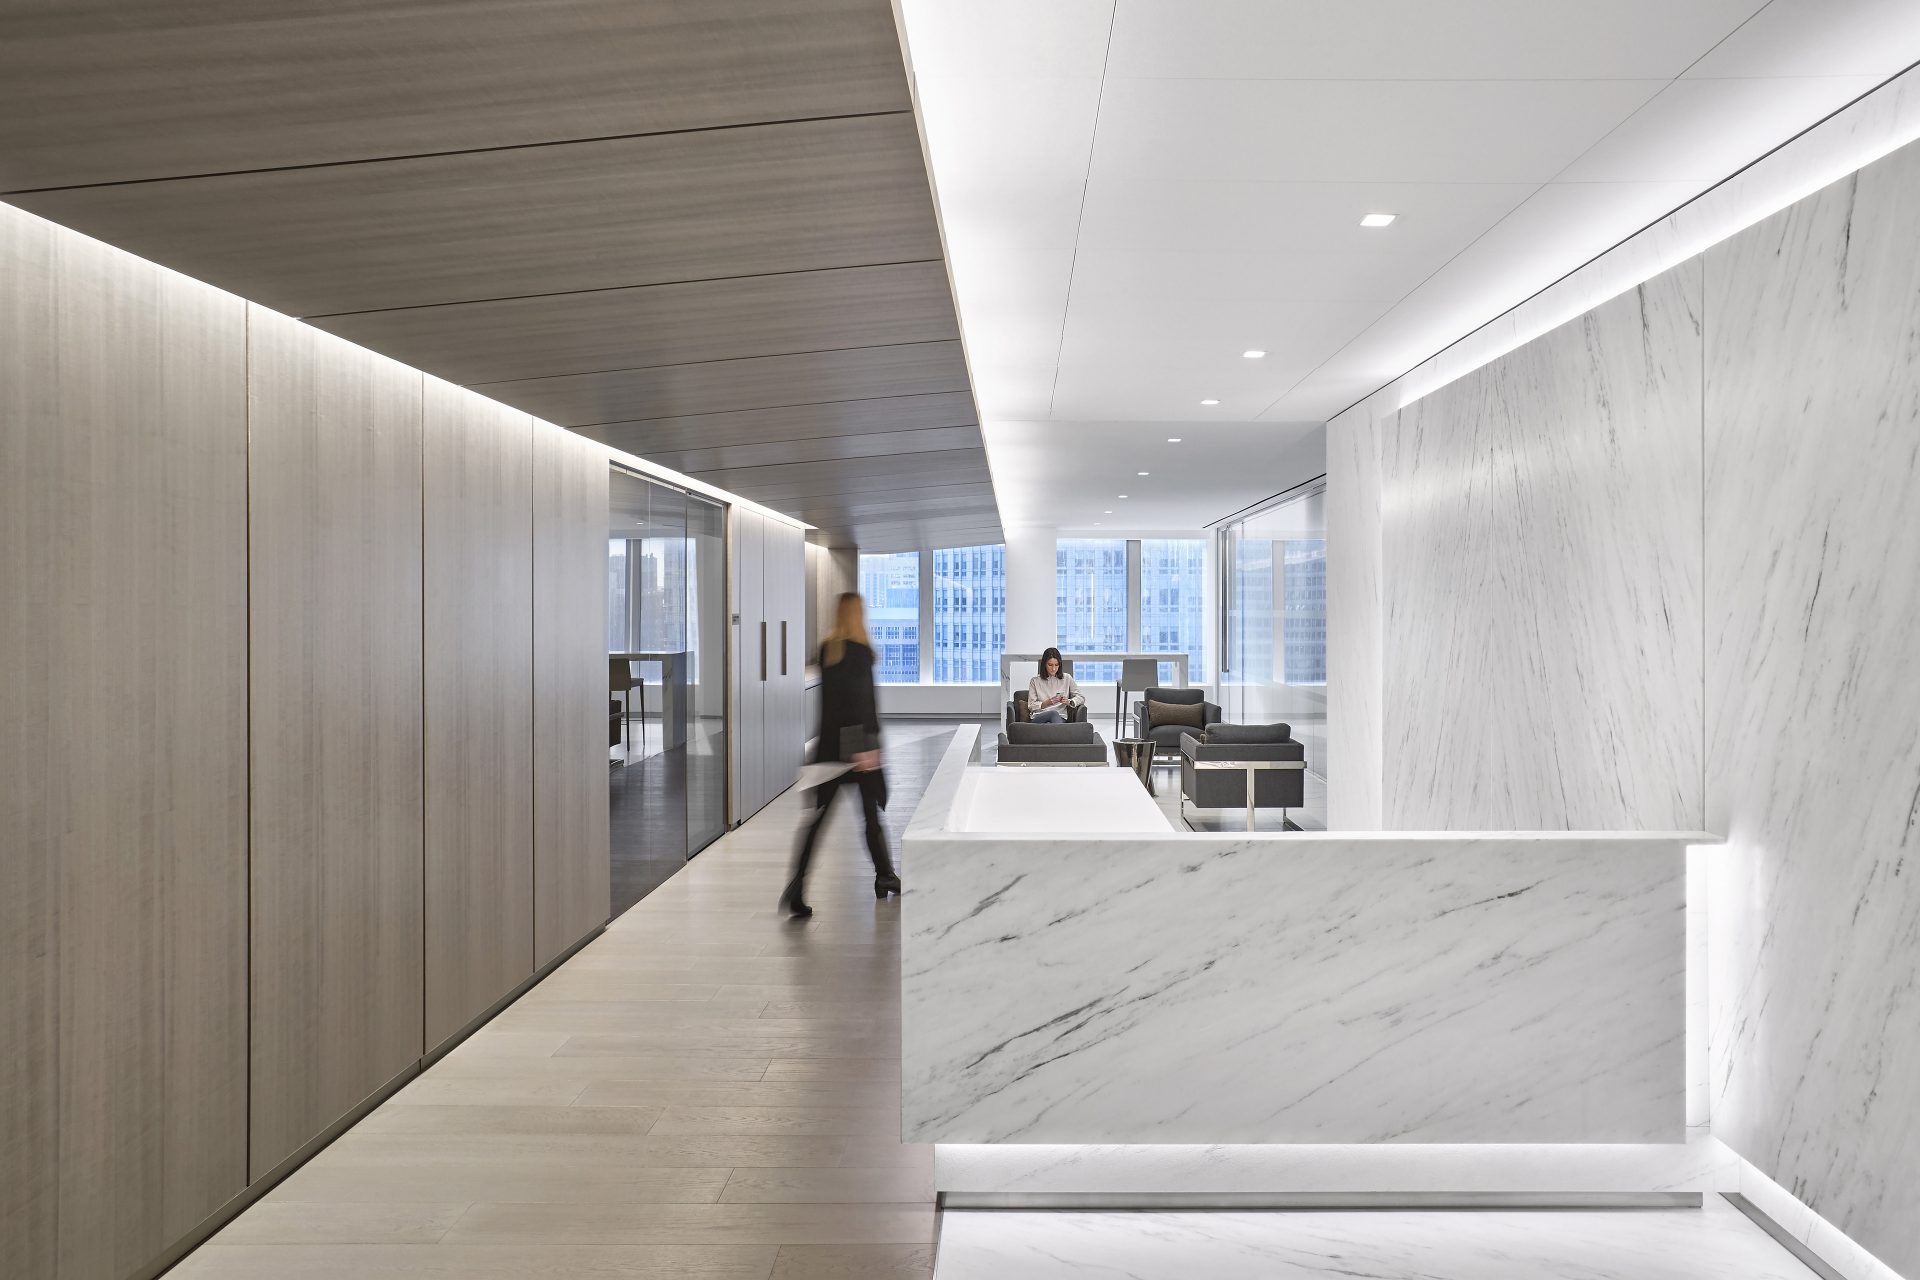 Reception space at the new Omnicom Headquarters